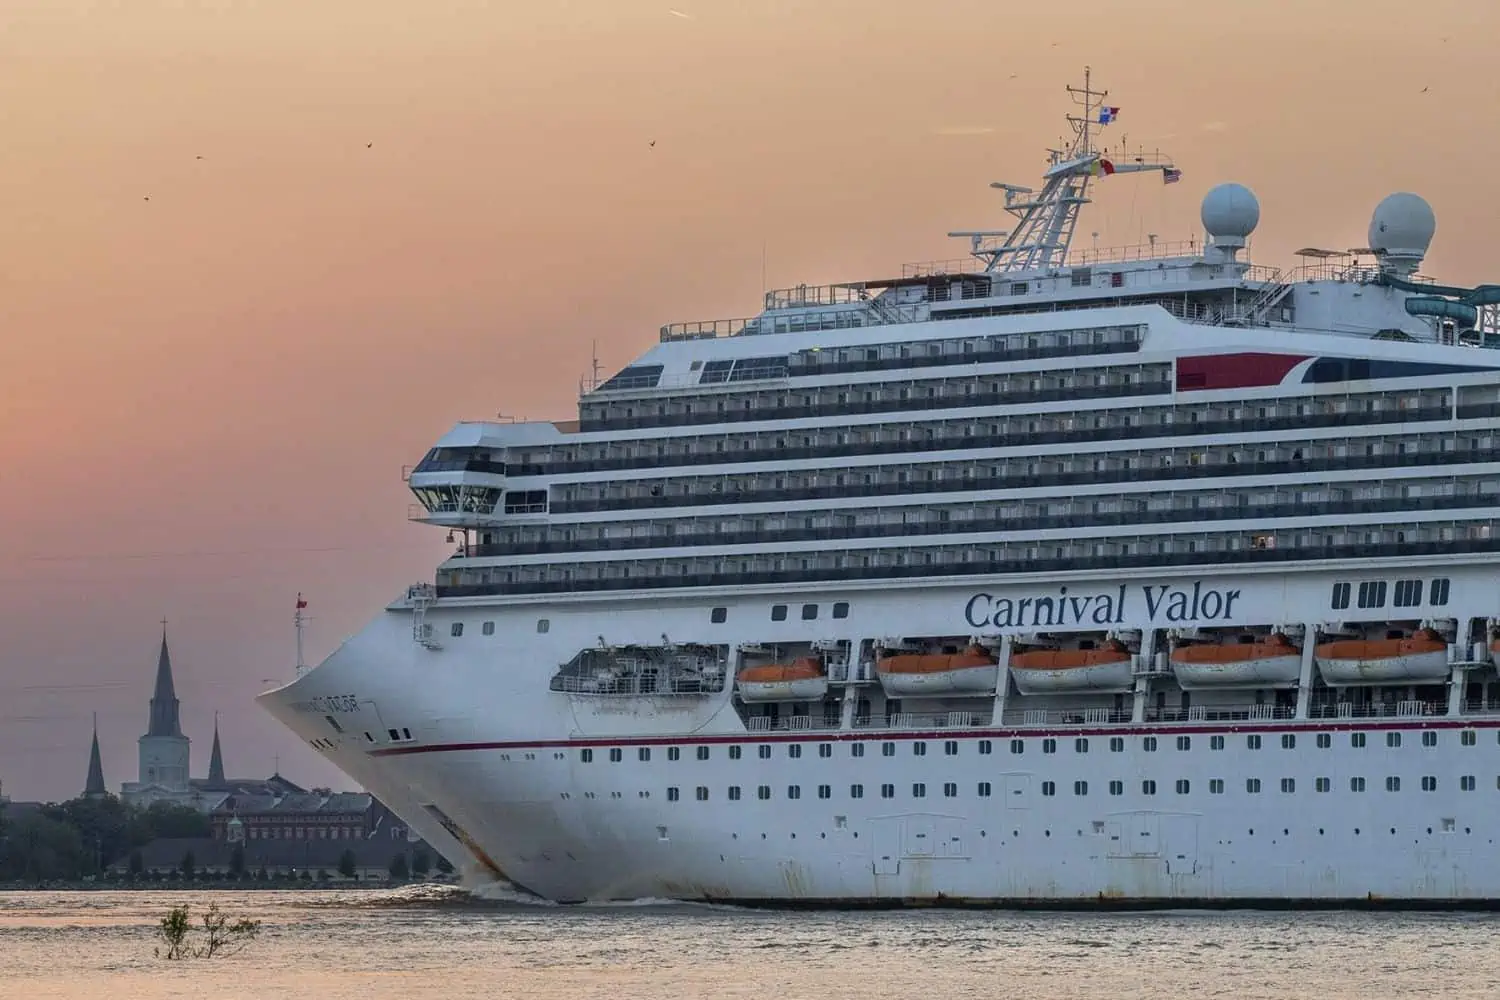 [WATCH]: Woman struggles with security before jumping off Carnival Cruise Ship